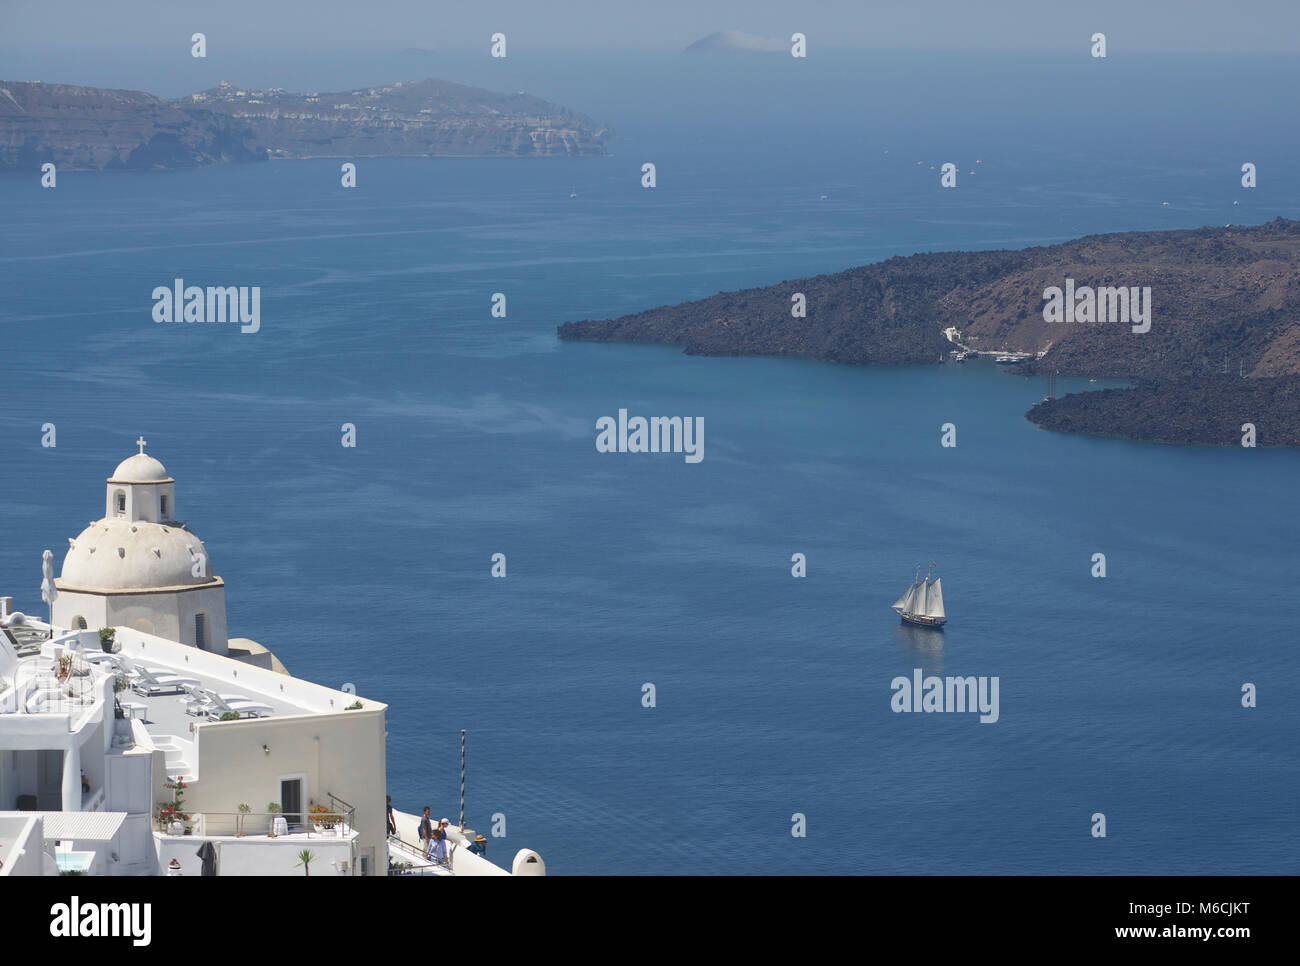 View of the caldera at Santorini/Thira, from Fira. 1917 schooner Texel No6 in the background Stock Photo